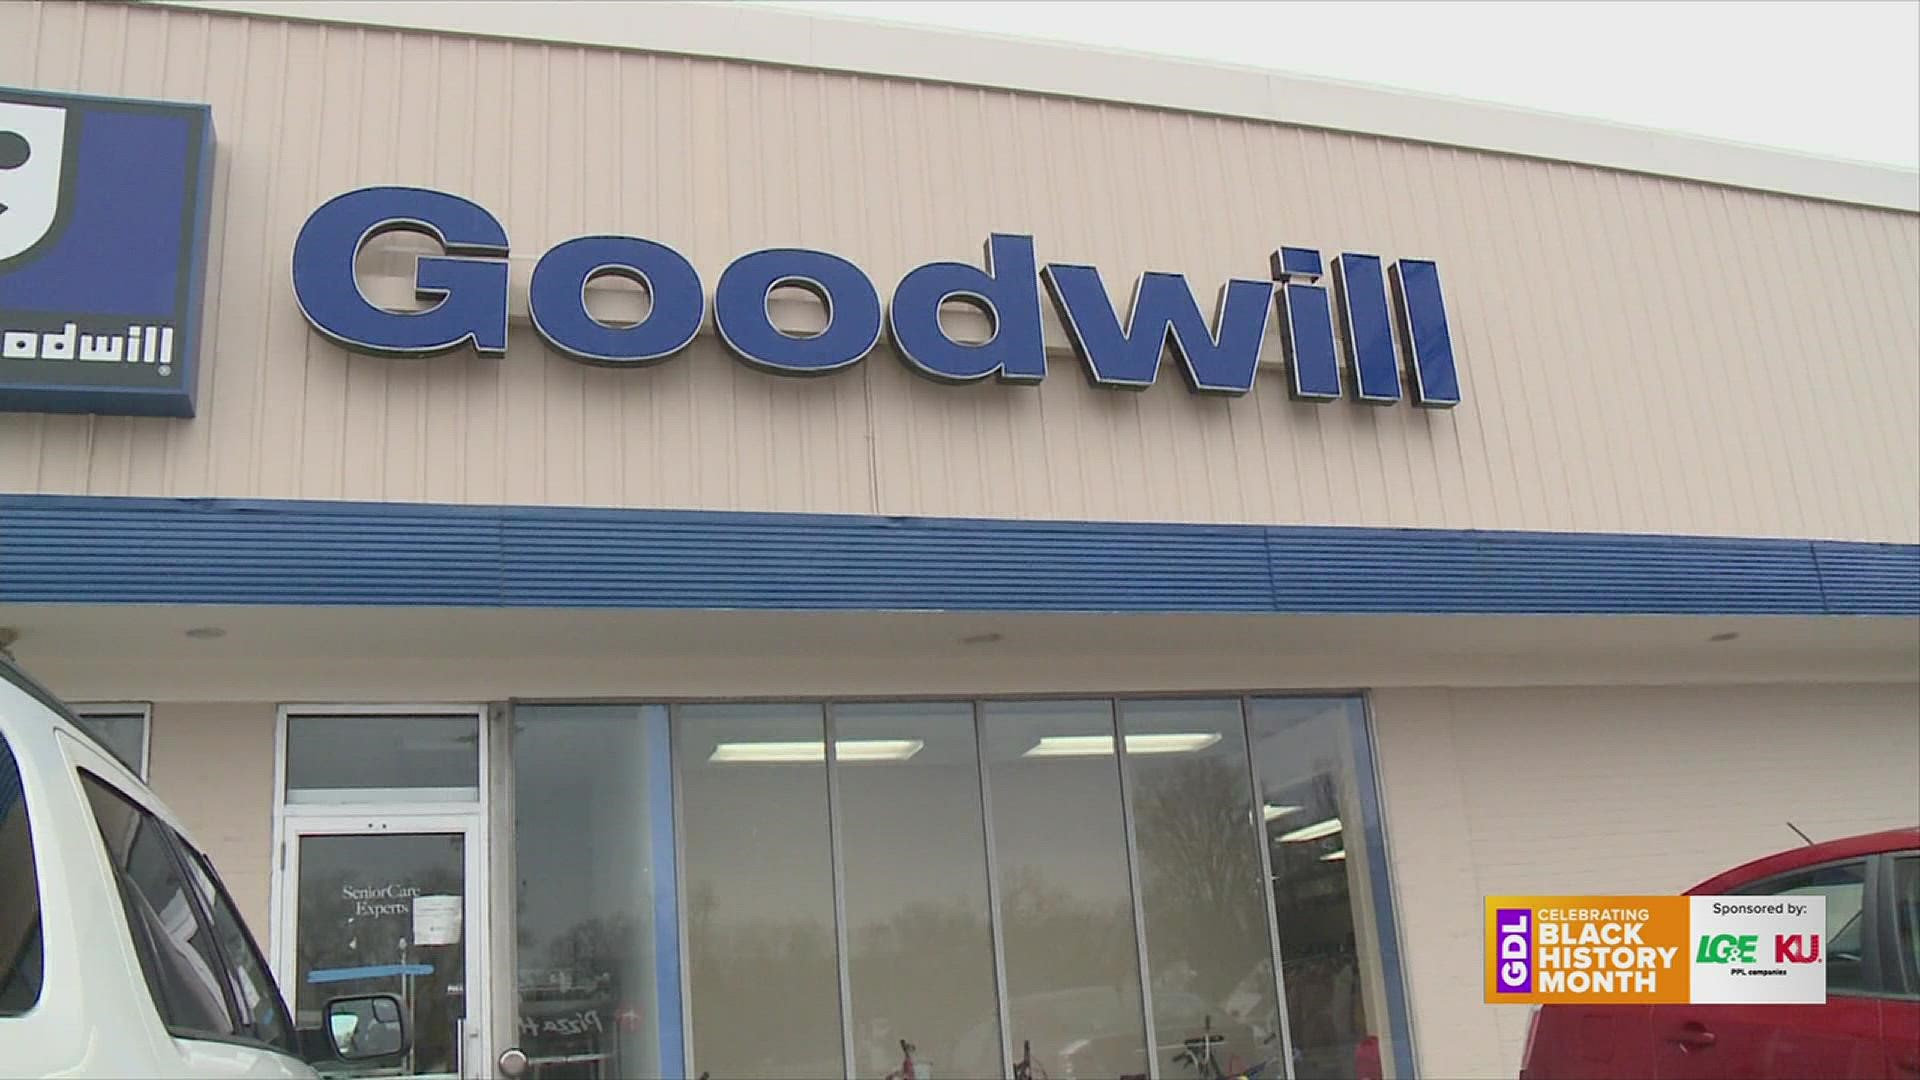 You can find more about Goodwill's "Another Way" program at GoodwillKY.org.